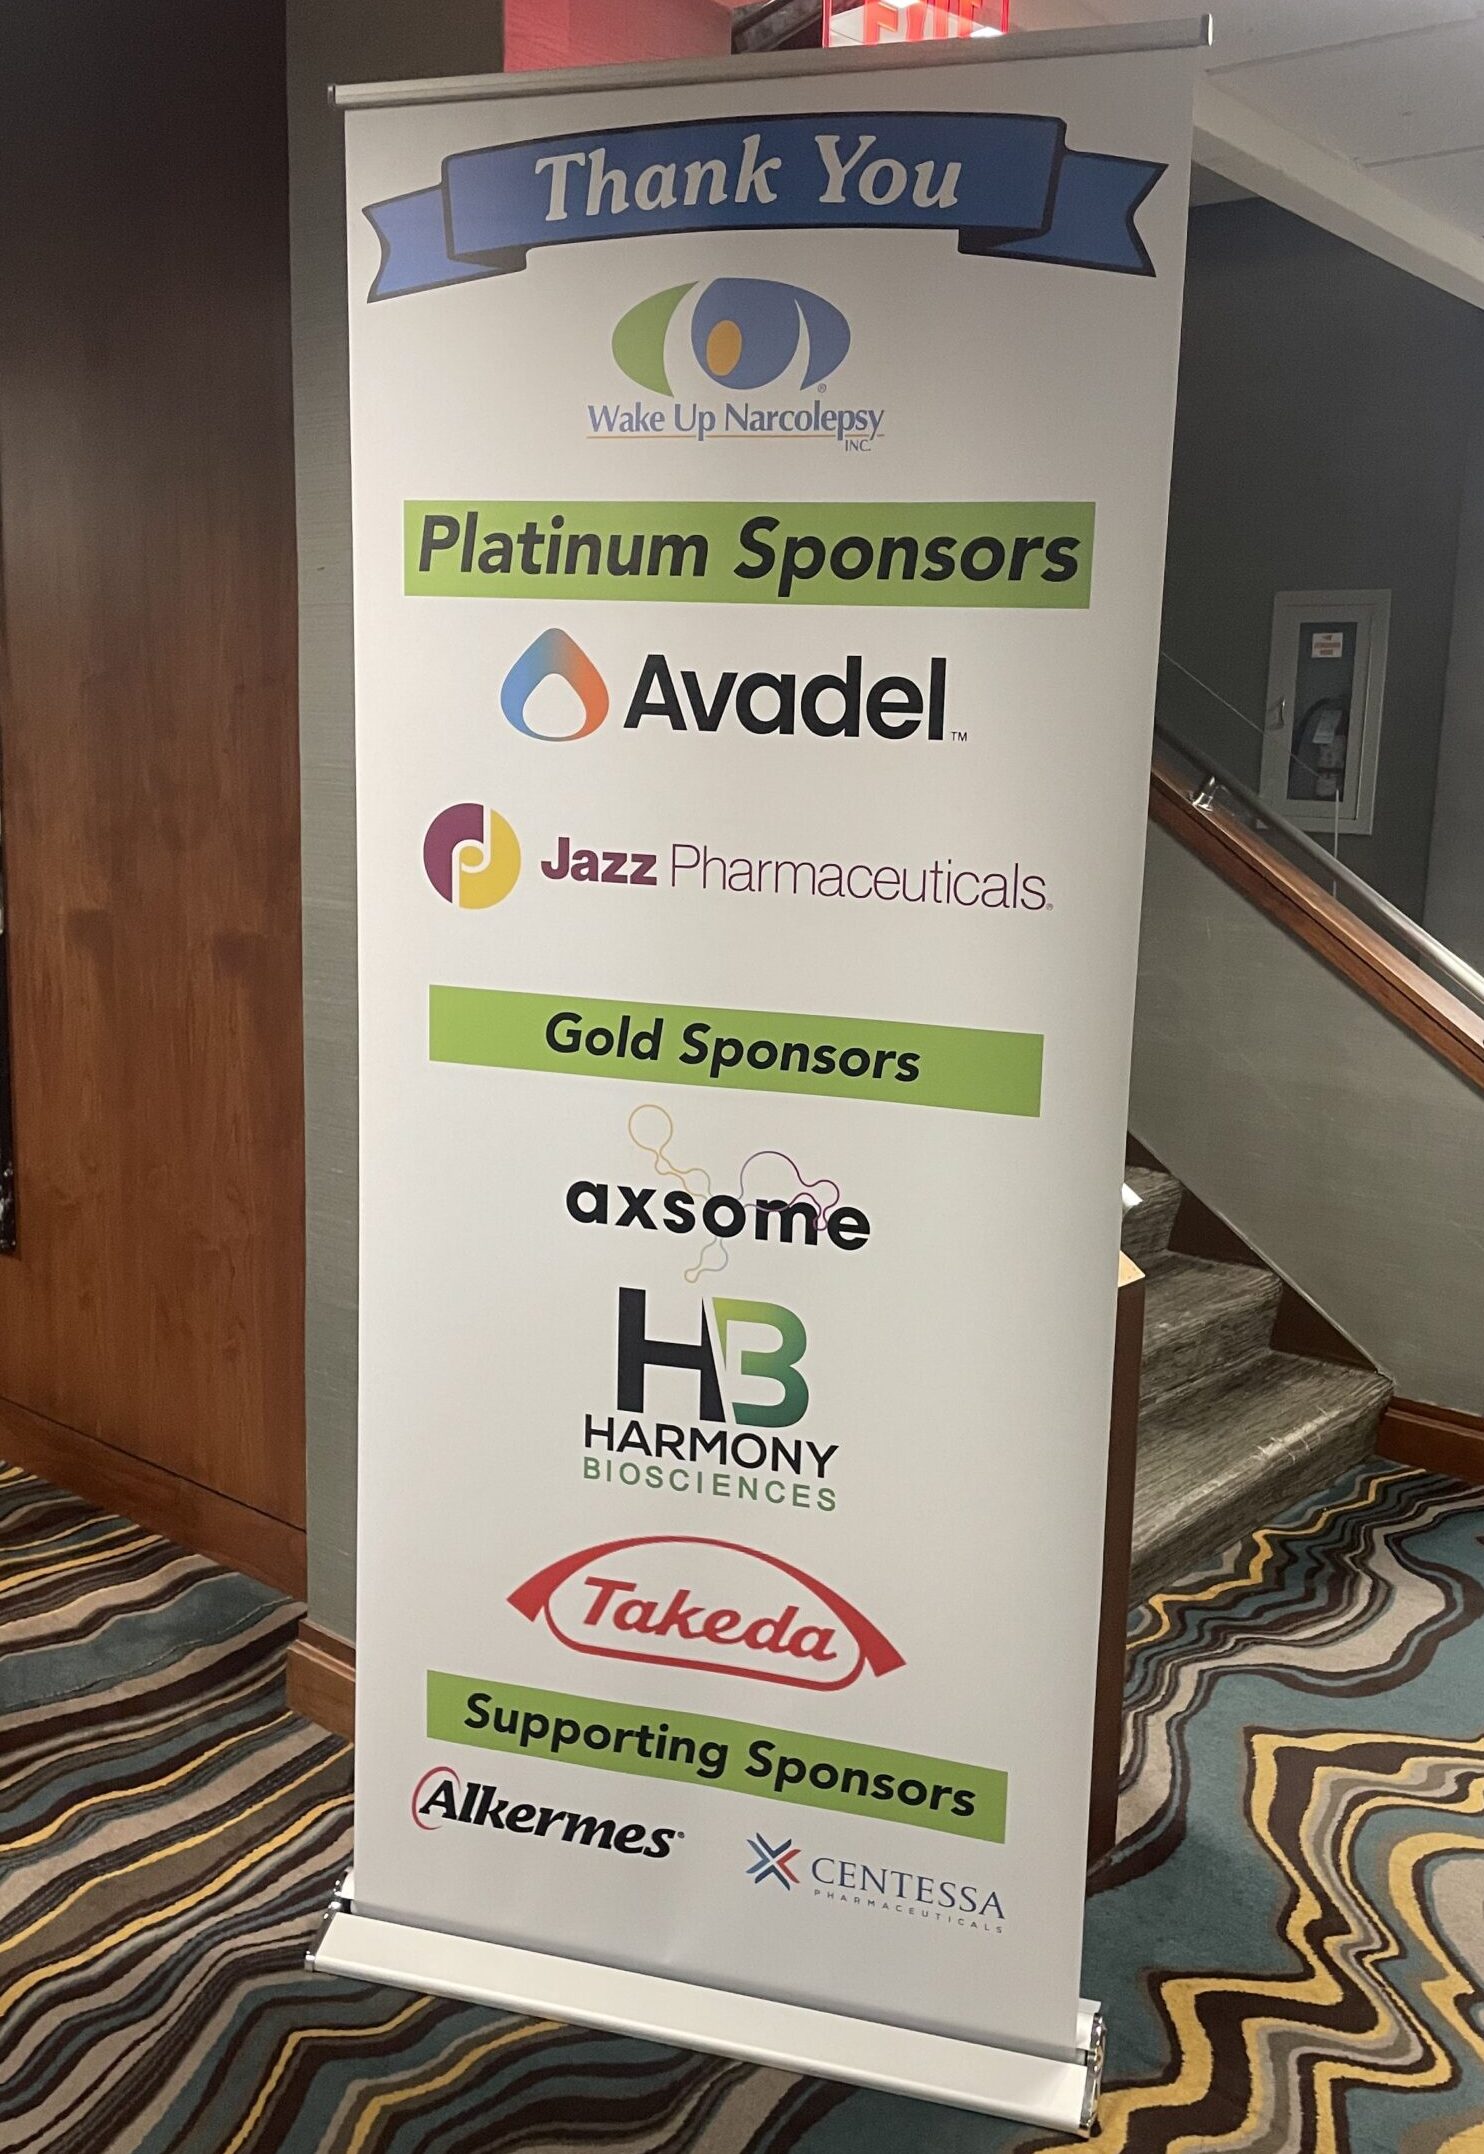 Sponsor Banner at 2023 Wake Up Narcolepsy National Conference & Patient Summit in Rochester, Minnesota - Platinum Sponsors - Avadel, Jazz Pharmaceuticals - Gold Sponsors - Axsome, Harmony Biosciences, Takeda - Supporting Sponsors - Alkermes, Centessa Pharmaceuticals